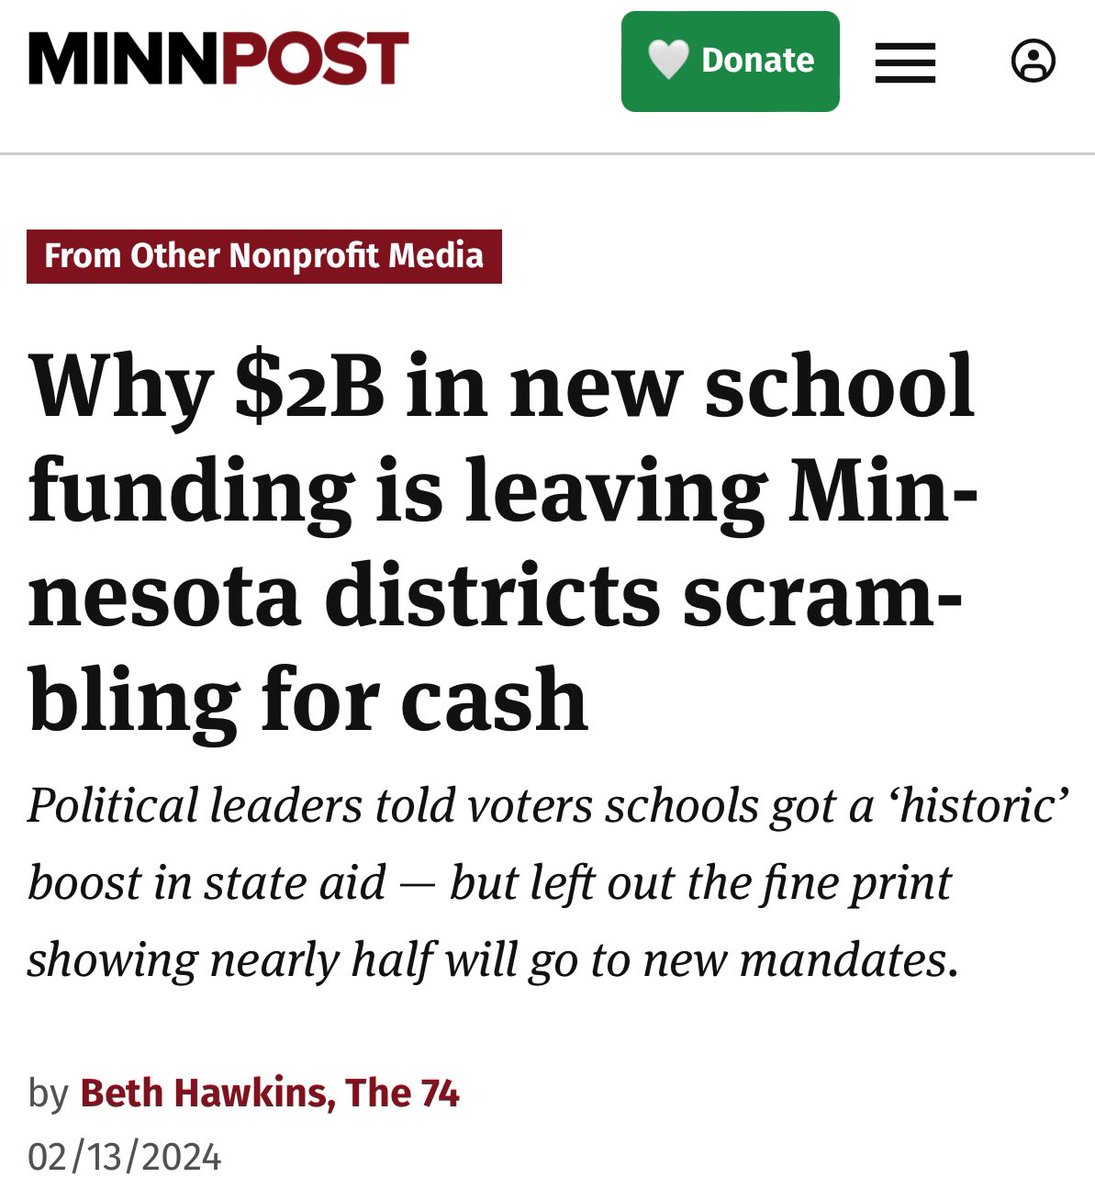 School districts in Minnesota are literally taking out loans to fund their students & classrooms while the legislature & Governor take a “victory lap” for mandating districts into deficits. Despite warnings - somehow “historic funding” led to shortfalls, cuts, loans, & tax levies